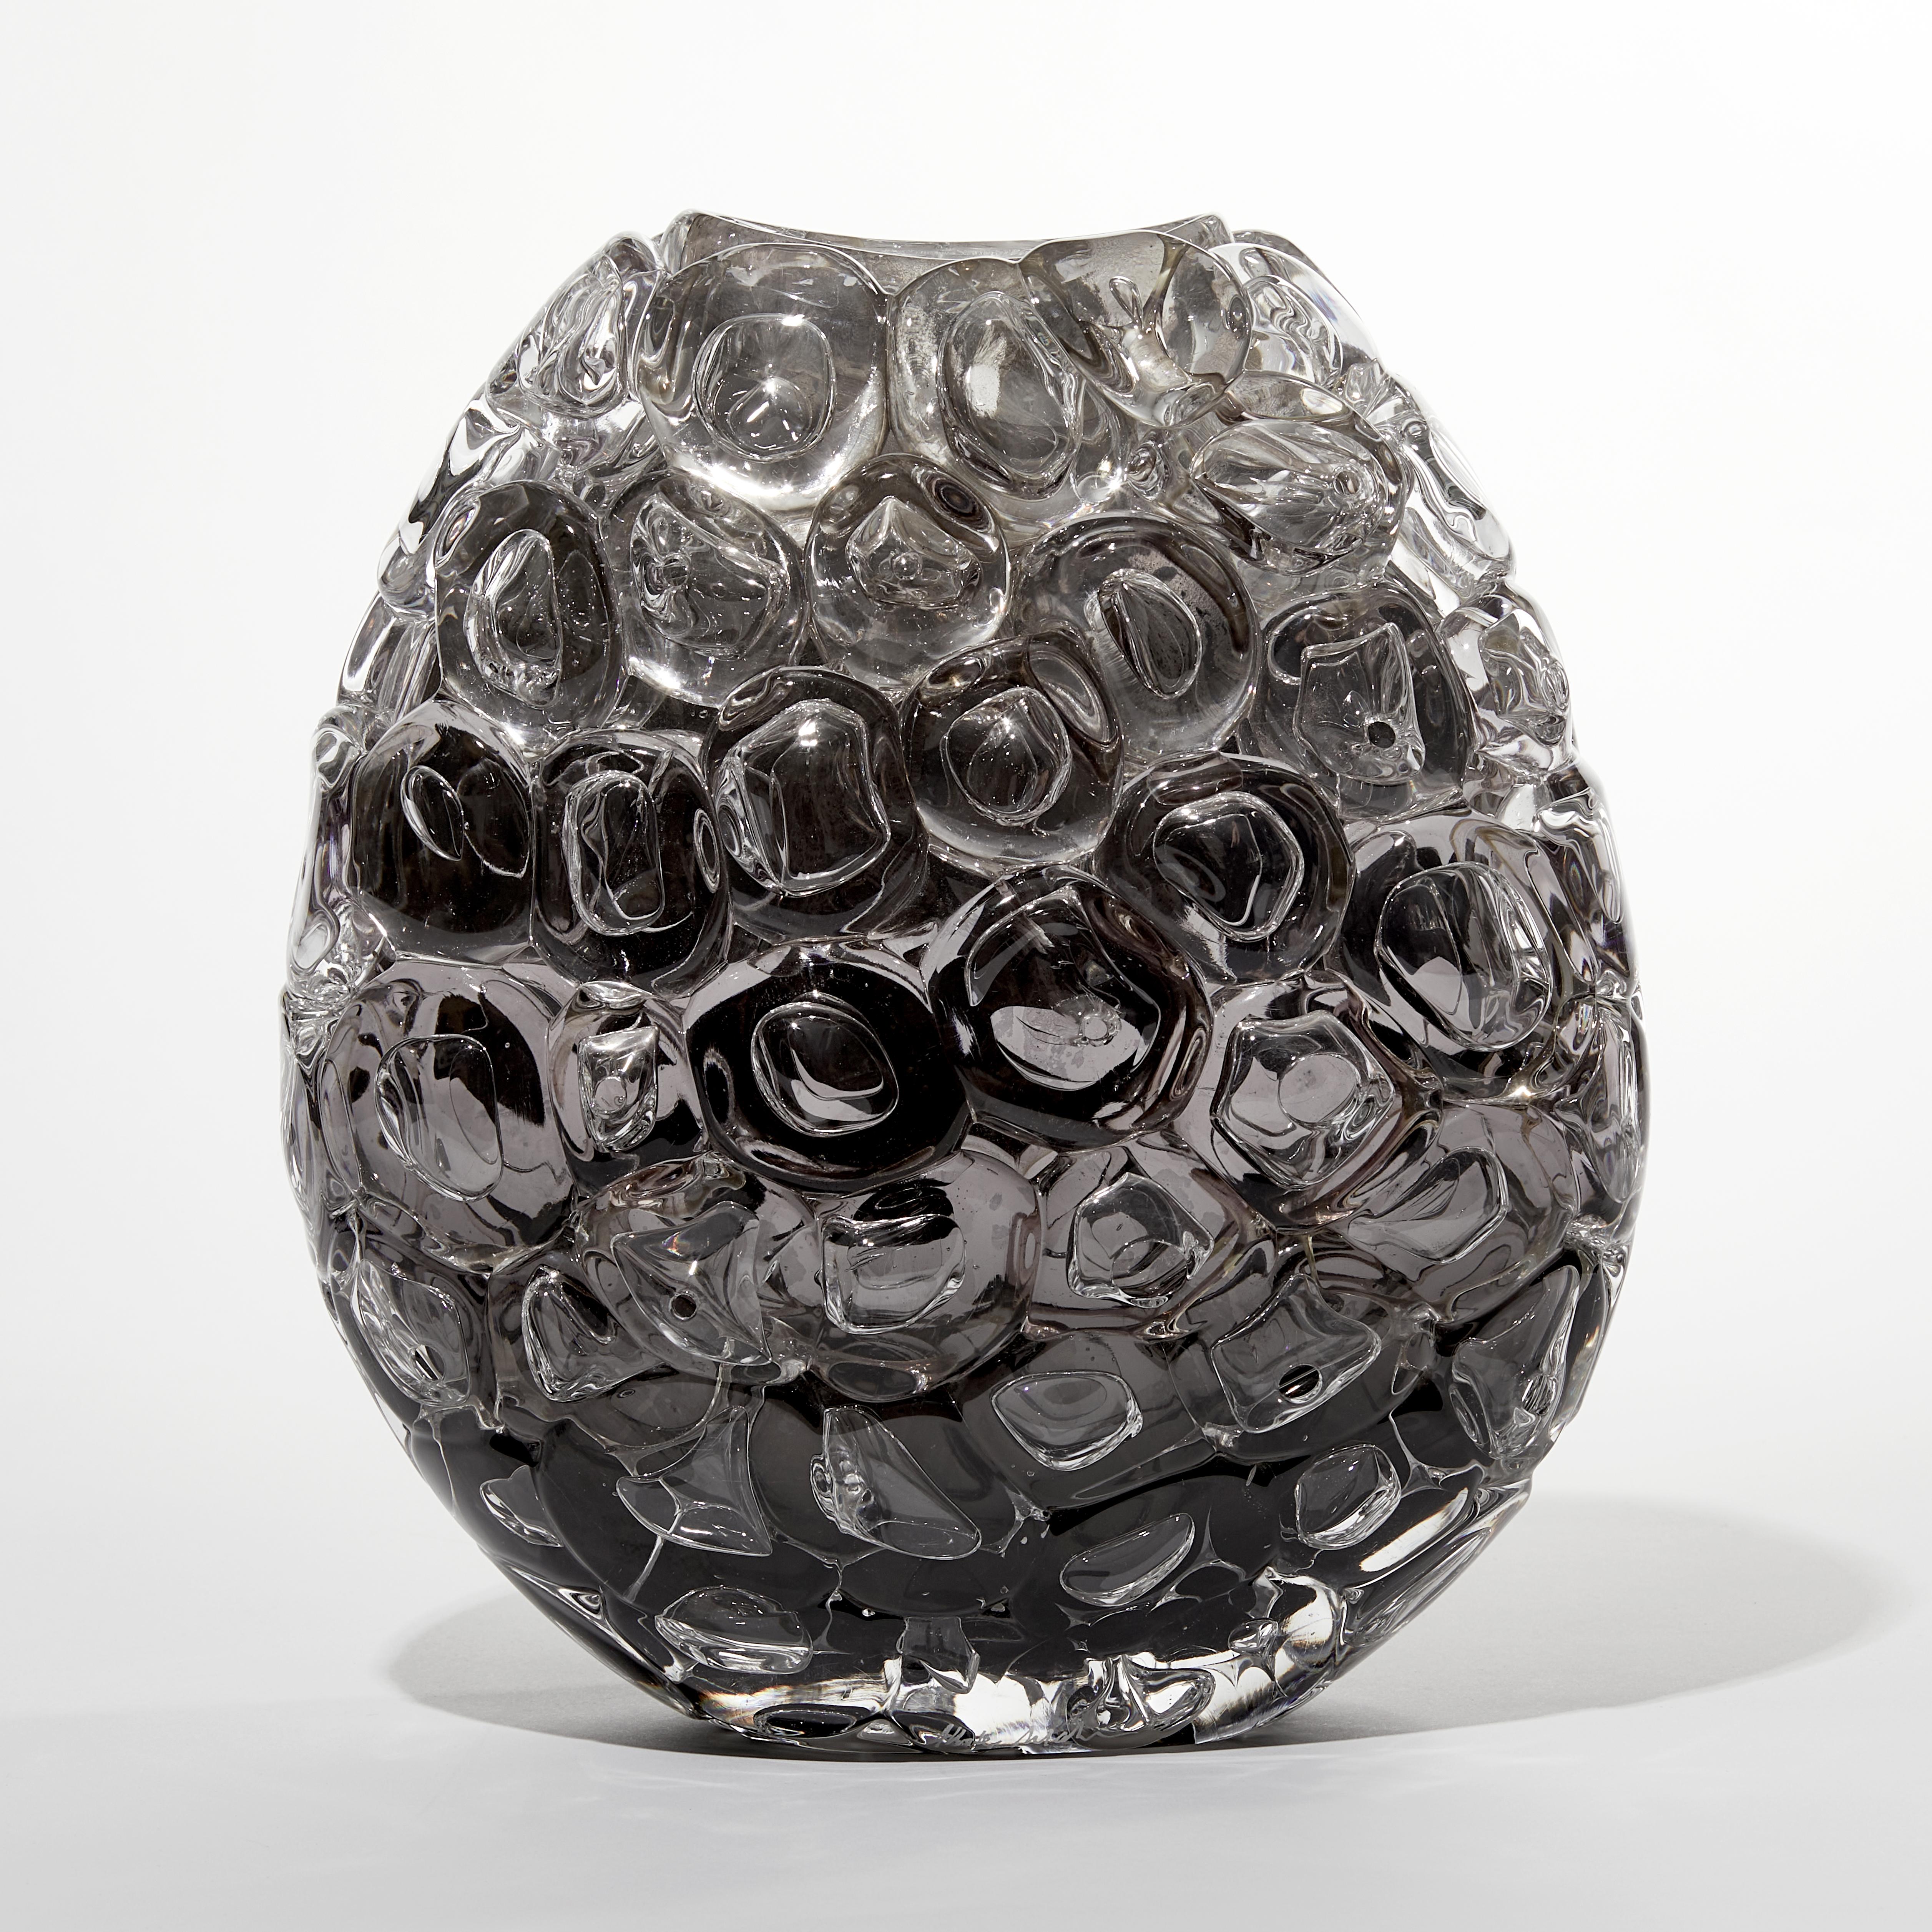 Art Glass Bubblewrap in Monochrome I, a Silver and Clear Glass Vase by Allister Malcolm